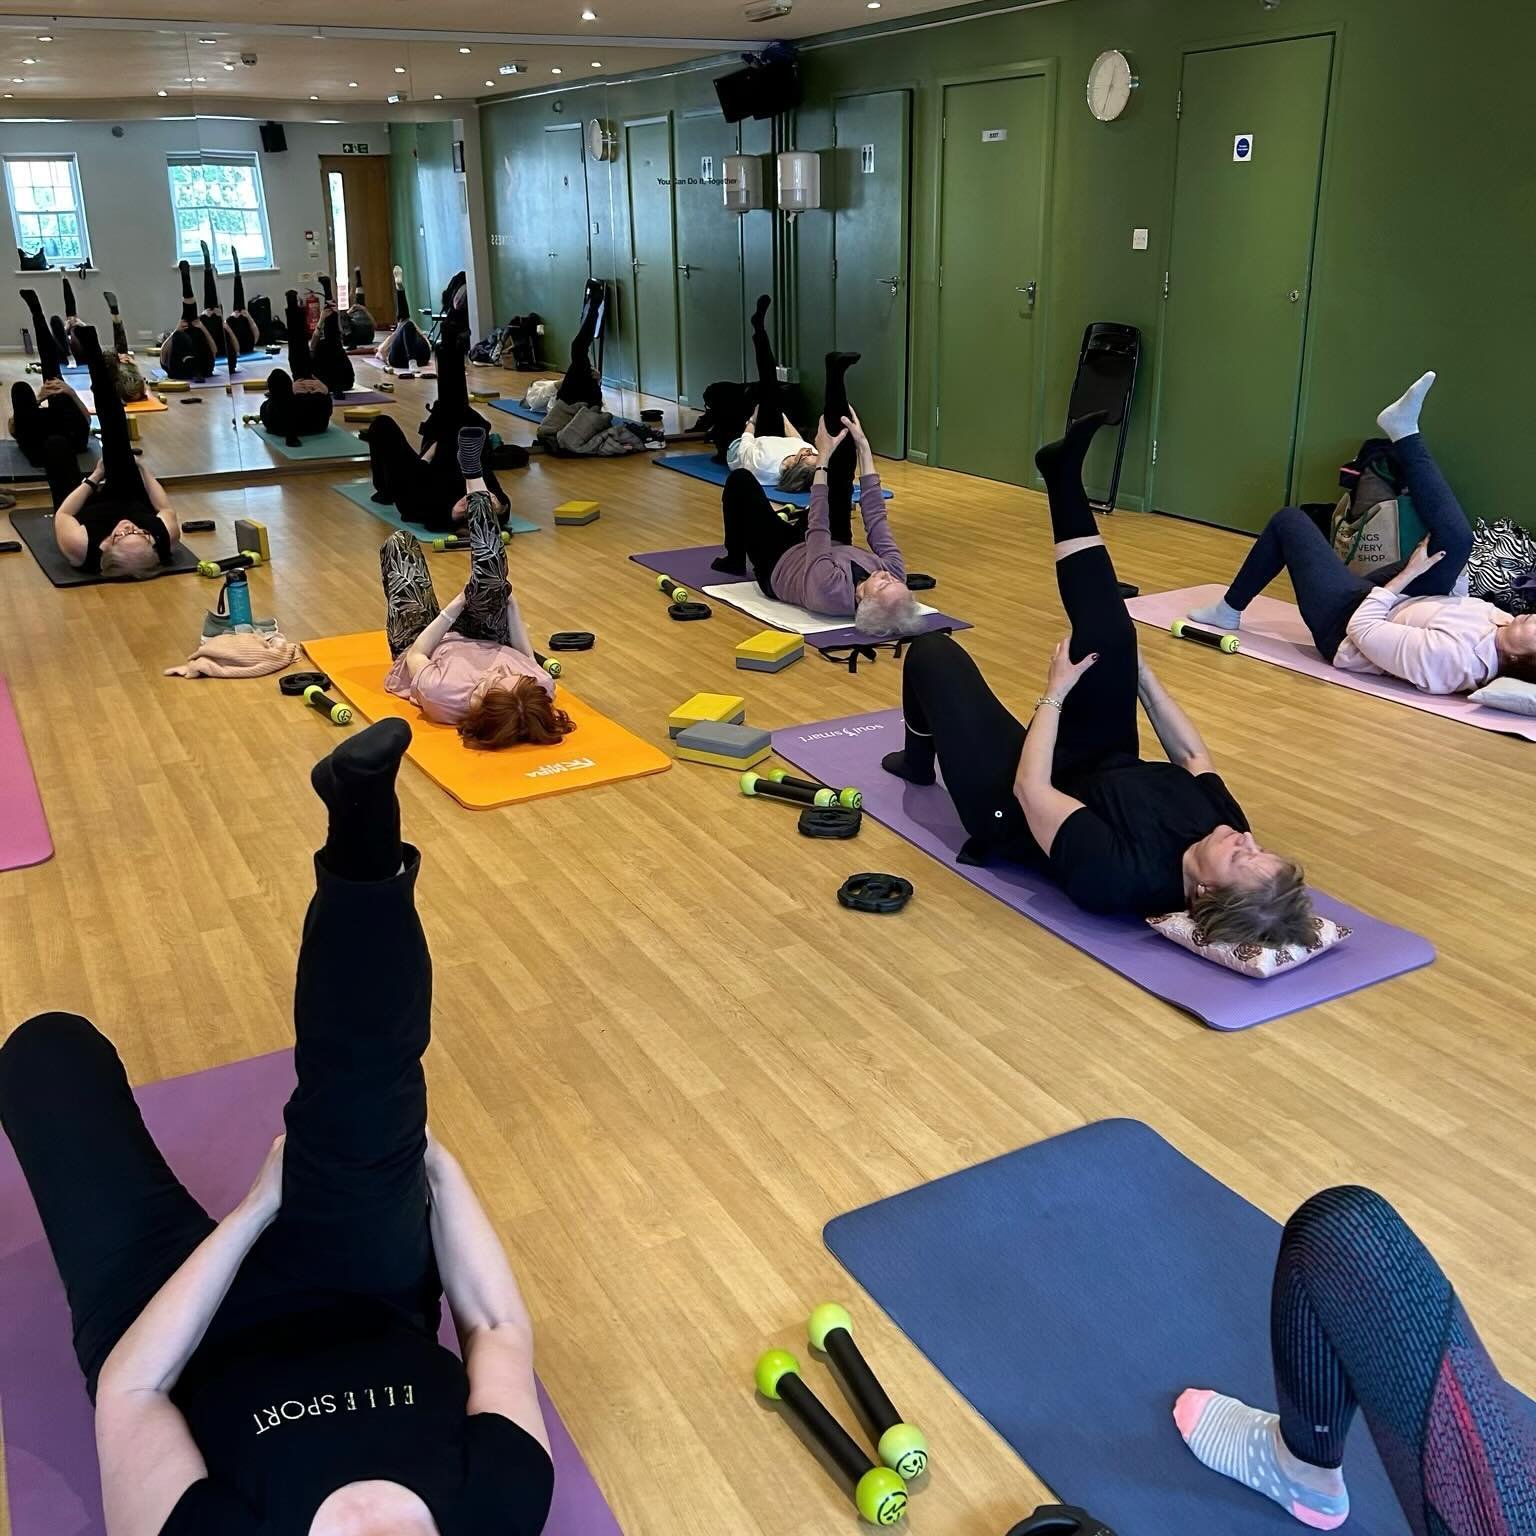 Feeling stronger, healthier and happier one Pilates class at a time! 💪 

Tuesday
11.30am - 12.30pm
9 Oakwood Parade, Queen Anne&rsquo;s Pl, Enfield, EN1 2PX

Thursday
6.00pm - 7.00pm
St Anne&rsquo;s Catholic High School (Upper Site), 6 Oakthorpe Roa